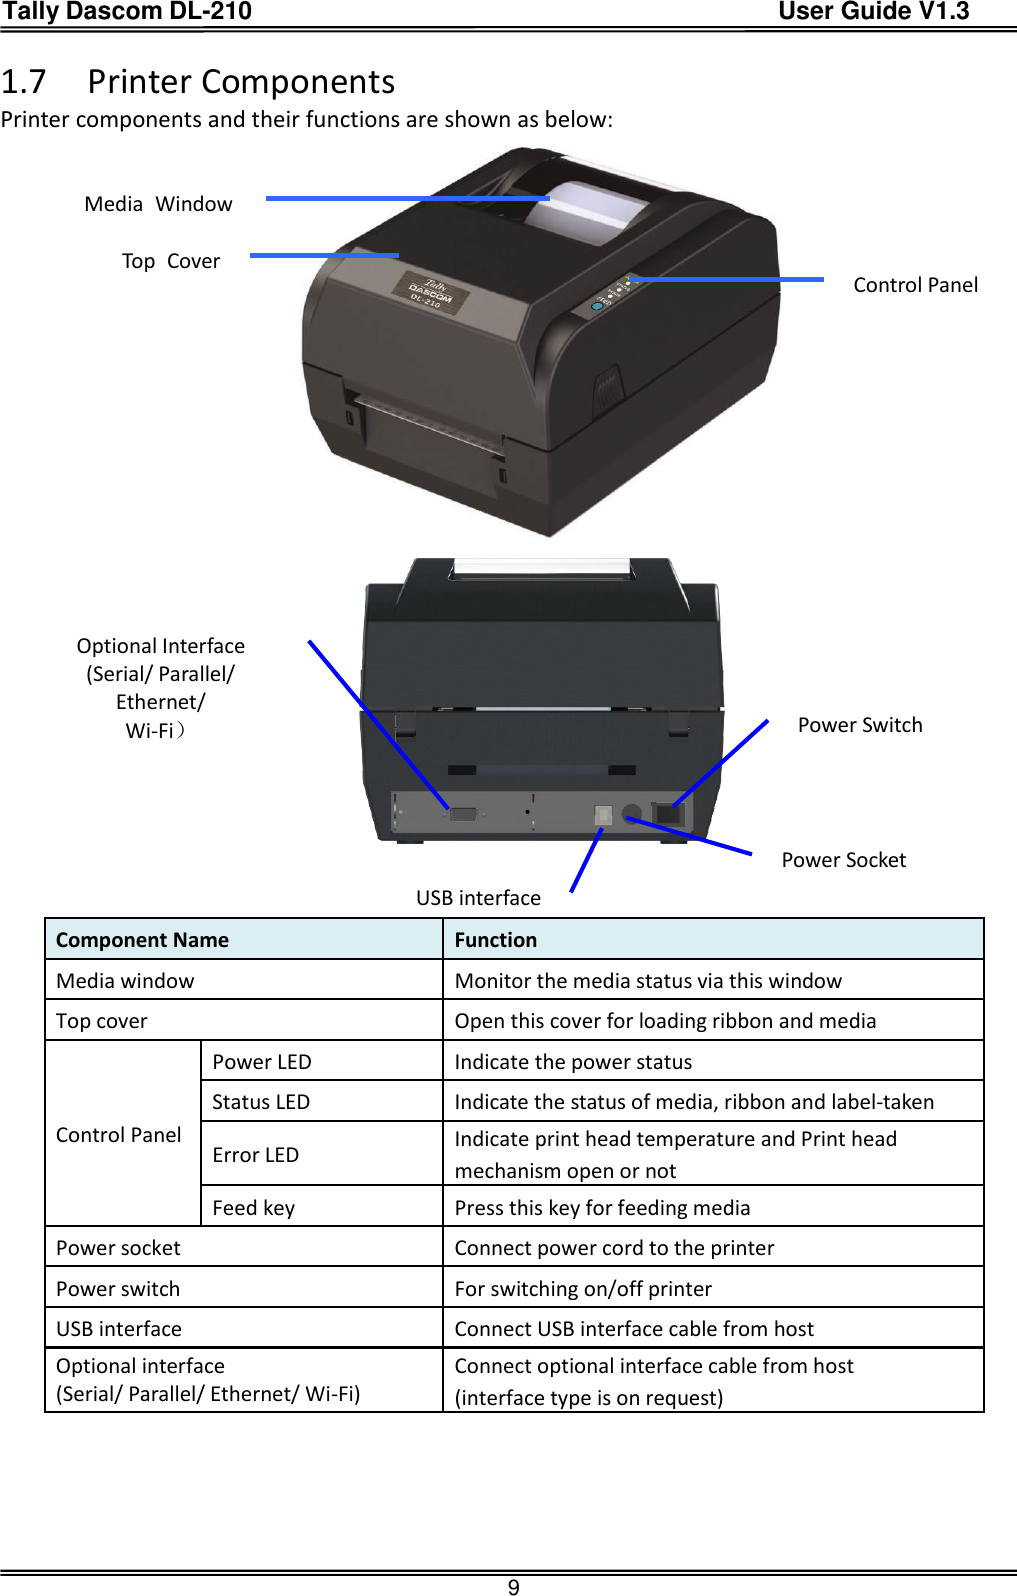 Tally Dascom DL-210                                          User Guide V1.3  9 1.7 Printer Components Printer components and their functions are shown as below:     Component Name Function Media window Monitor the media status via this window Top cover Open this cover for loading ribbon and media Control Panel Power LED Indicate the power status Status LED Indicate the status of media, ribbon and label-taken   Error LED Indicate print head temperature and Print head mechanism open or not Feed key Press this key for feeding media Power socket Connect power cord to the printer Power switch For switching on/off printer USB interface Connect USB interface cable from host Optional interface (Serial/ Parallel/ Ethernet/ Wi-Fi) Connect optional interface cable from host (interface type is on request)     Control Panel Top  Cover Media  Window Power Switch Optional Interface (Serial/ Parallel/ Ethernet/ Wi-Fi） USB interface Power Socket 